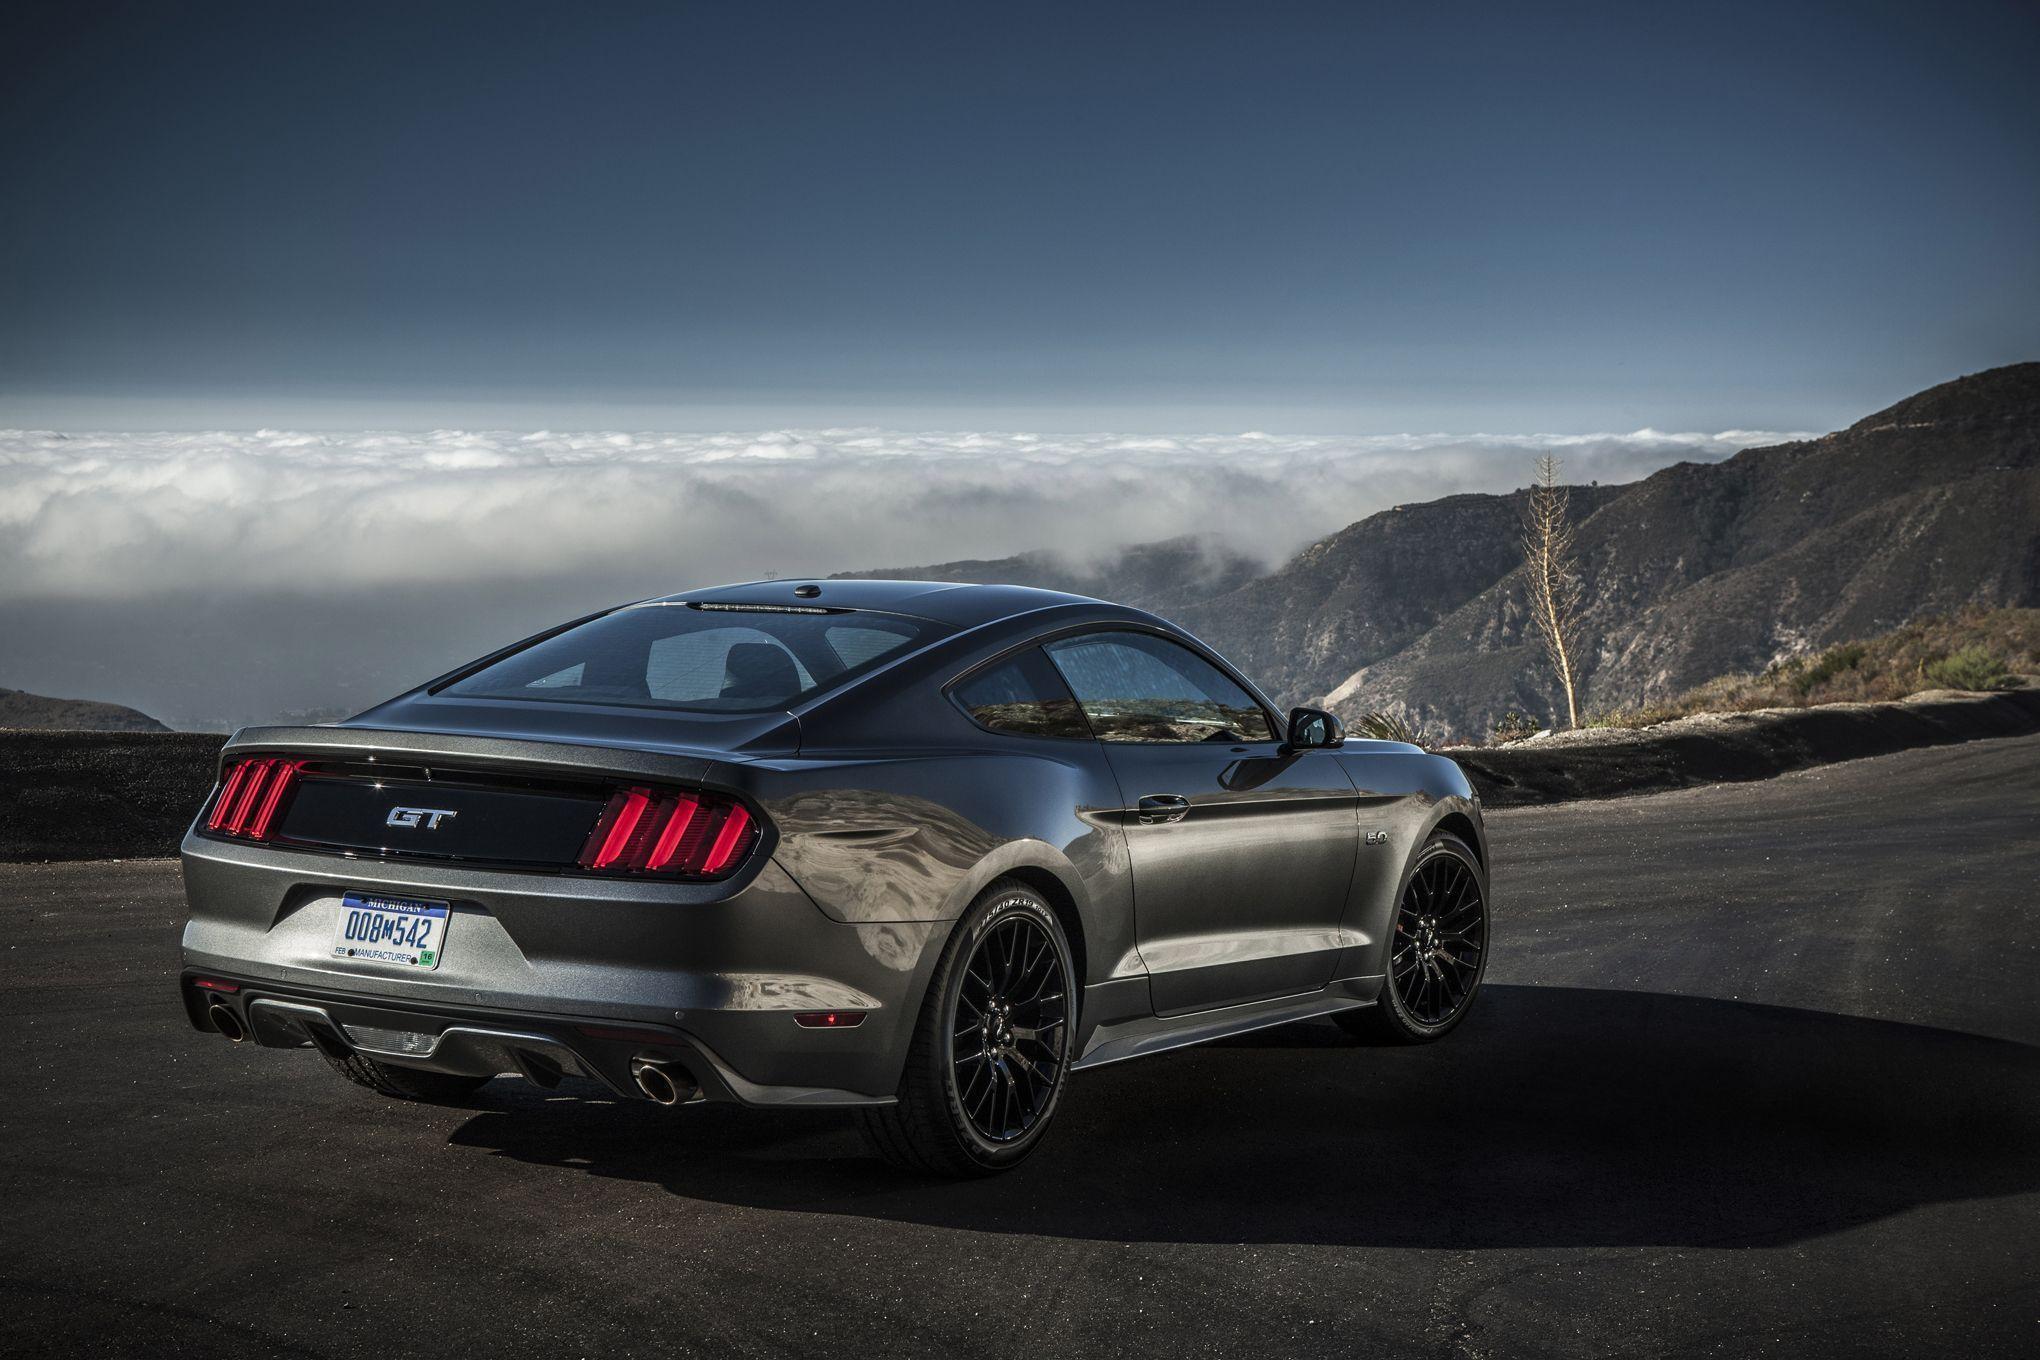 2015 Ford Mustang Gt Wallpapers